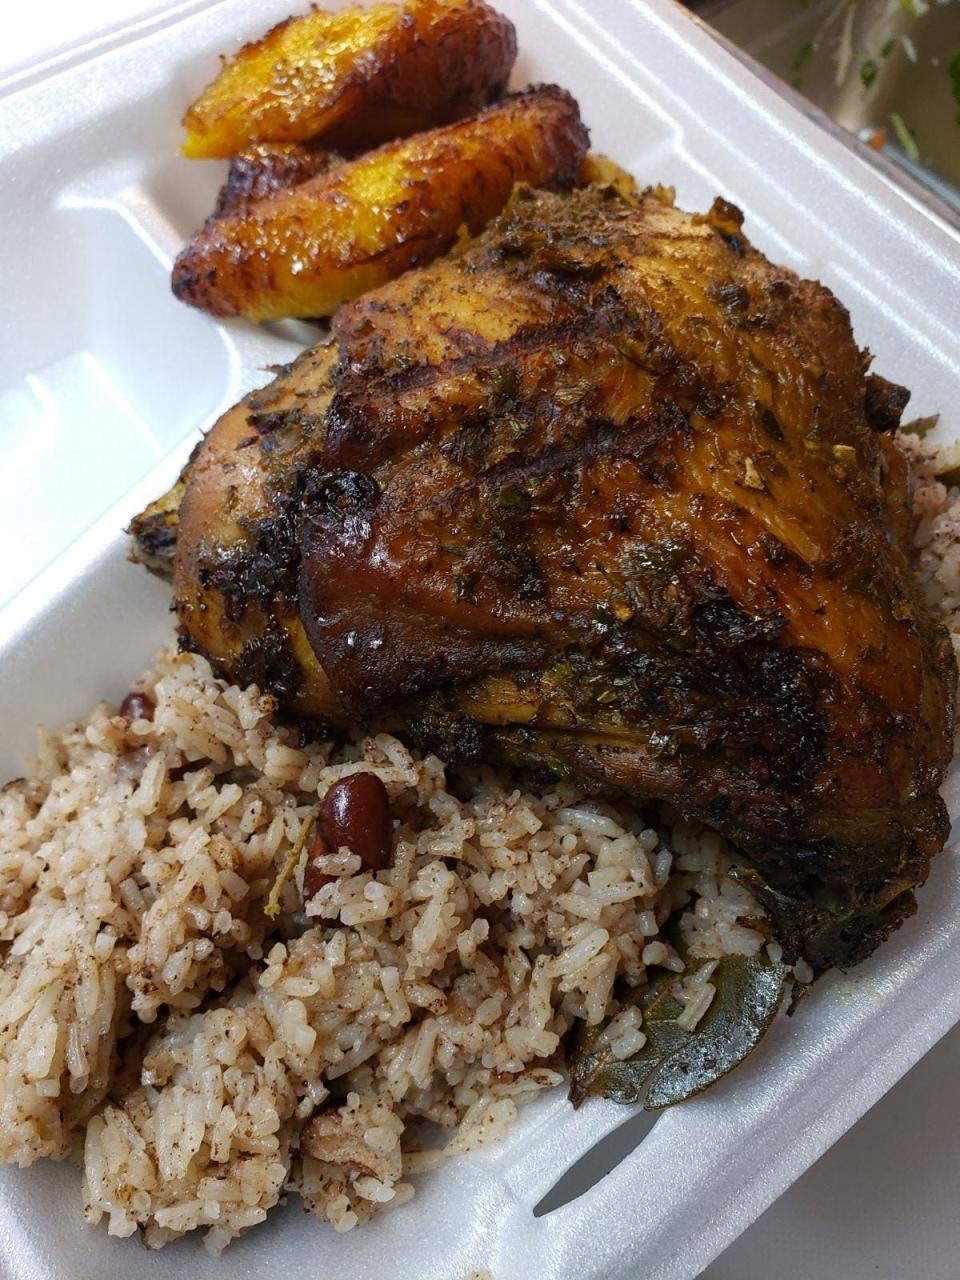 Soul Rebel restaurant's jerk chicken served with rice and peas and plantains.